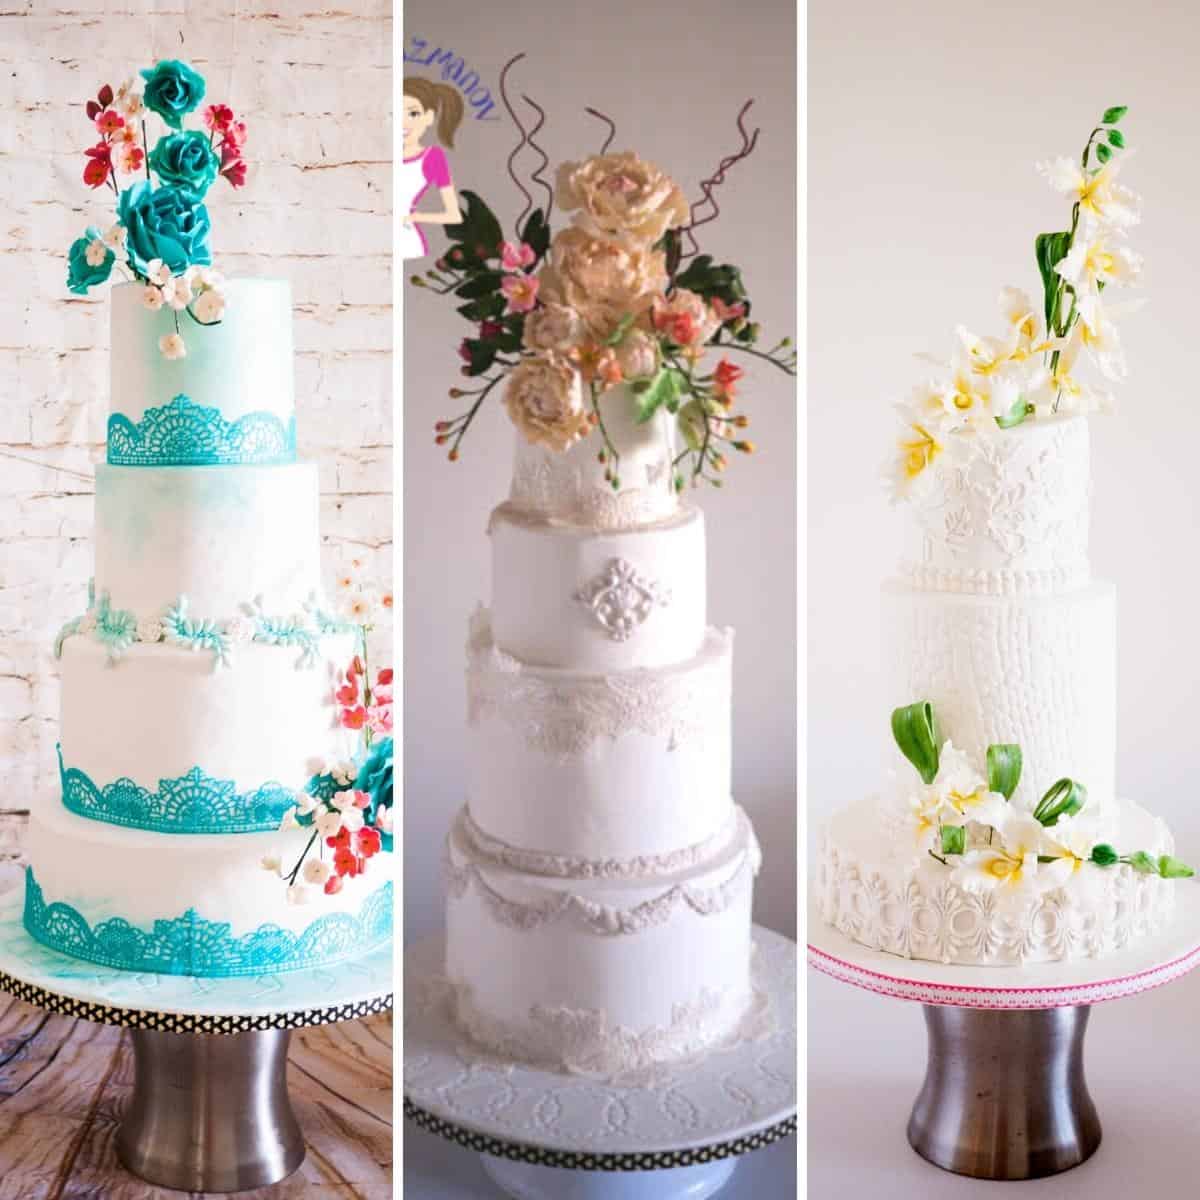 Cake Consultation – Tips and How To